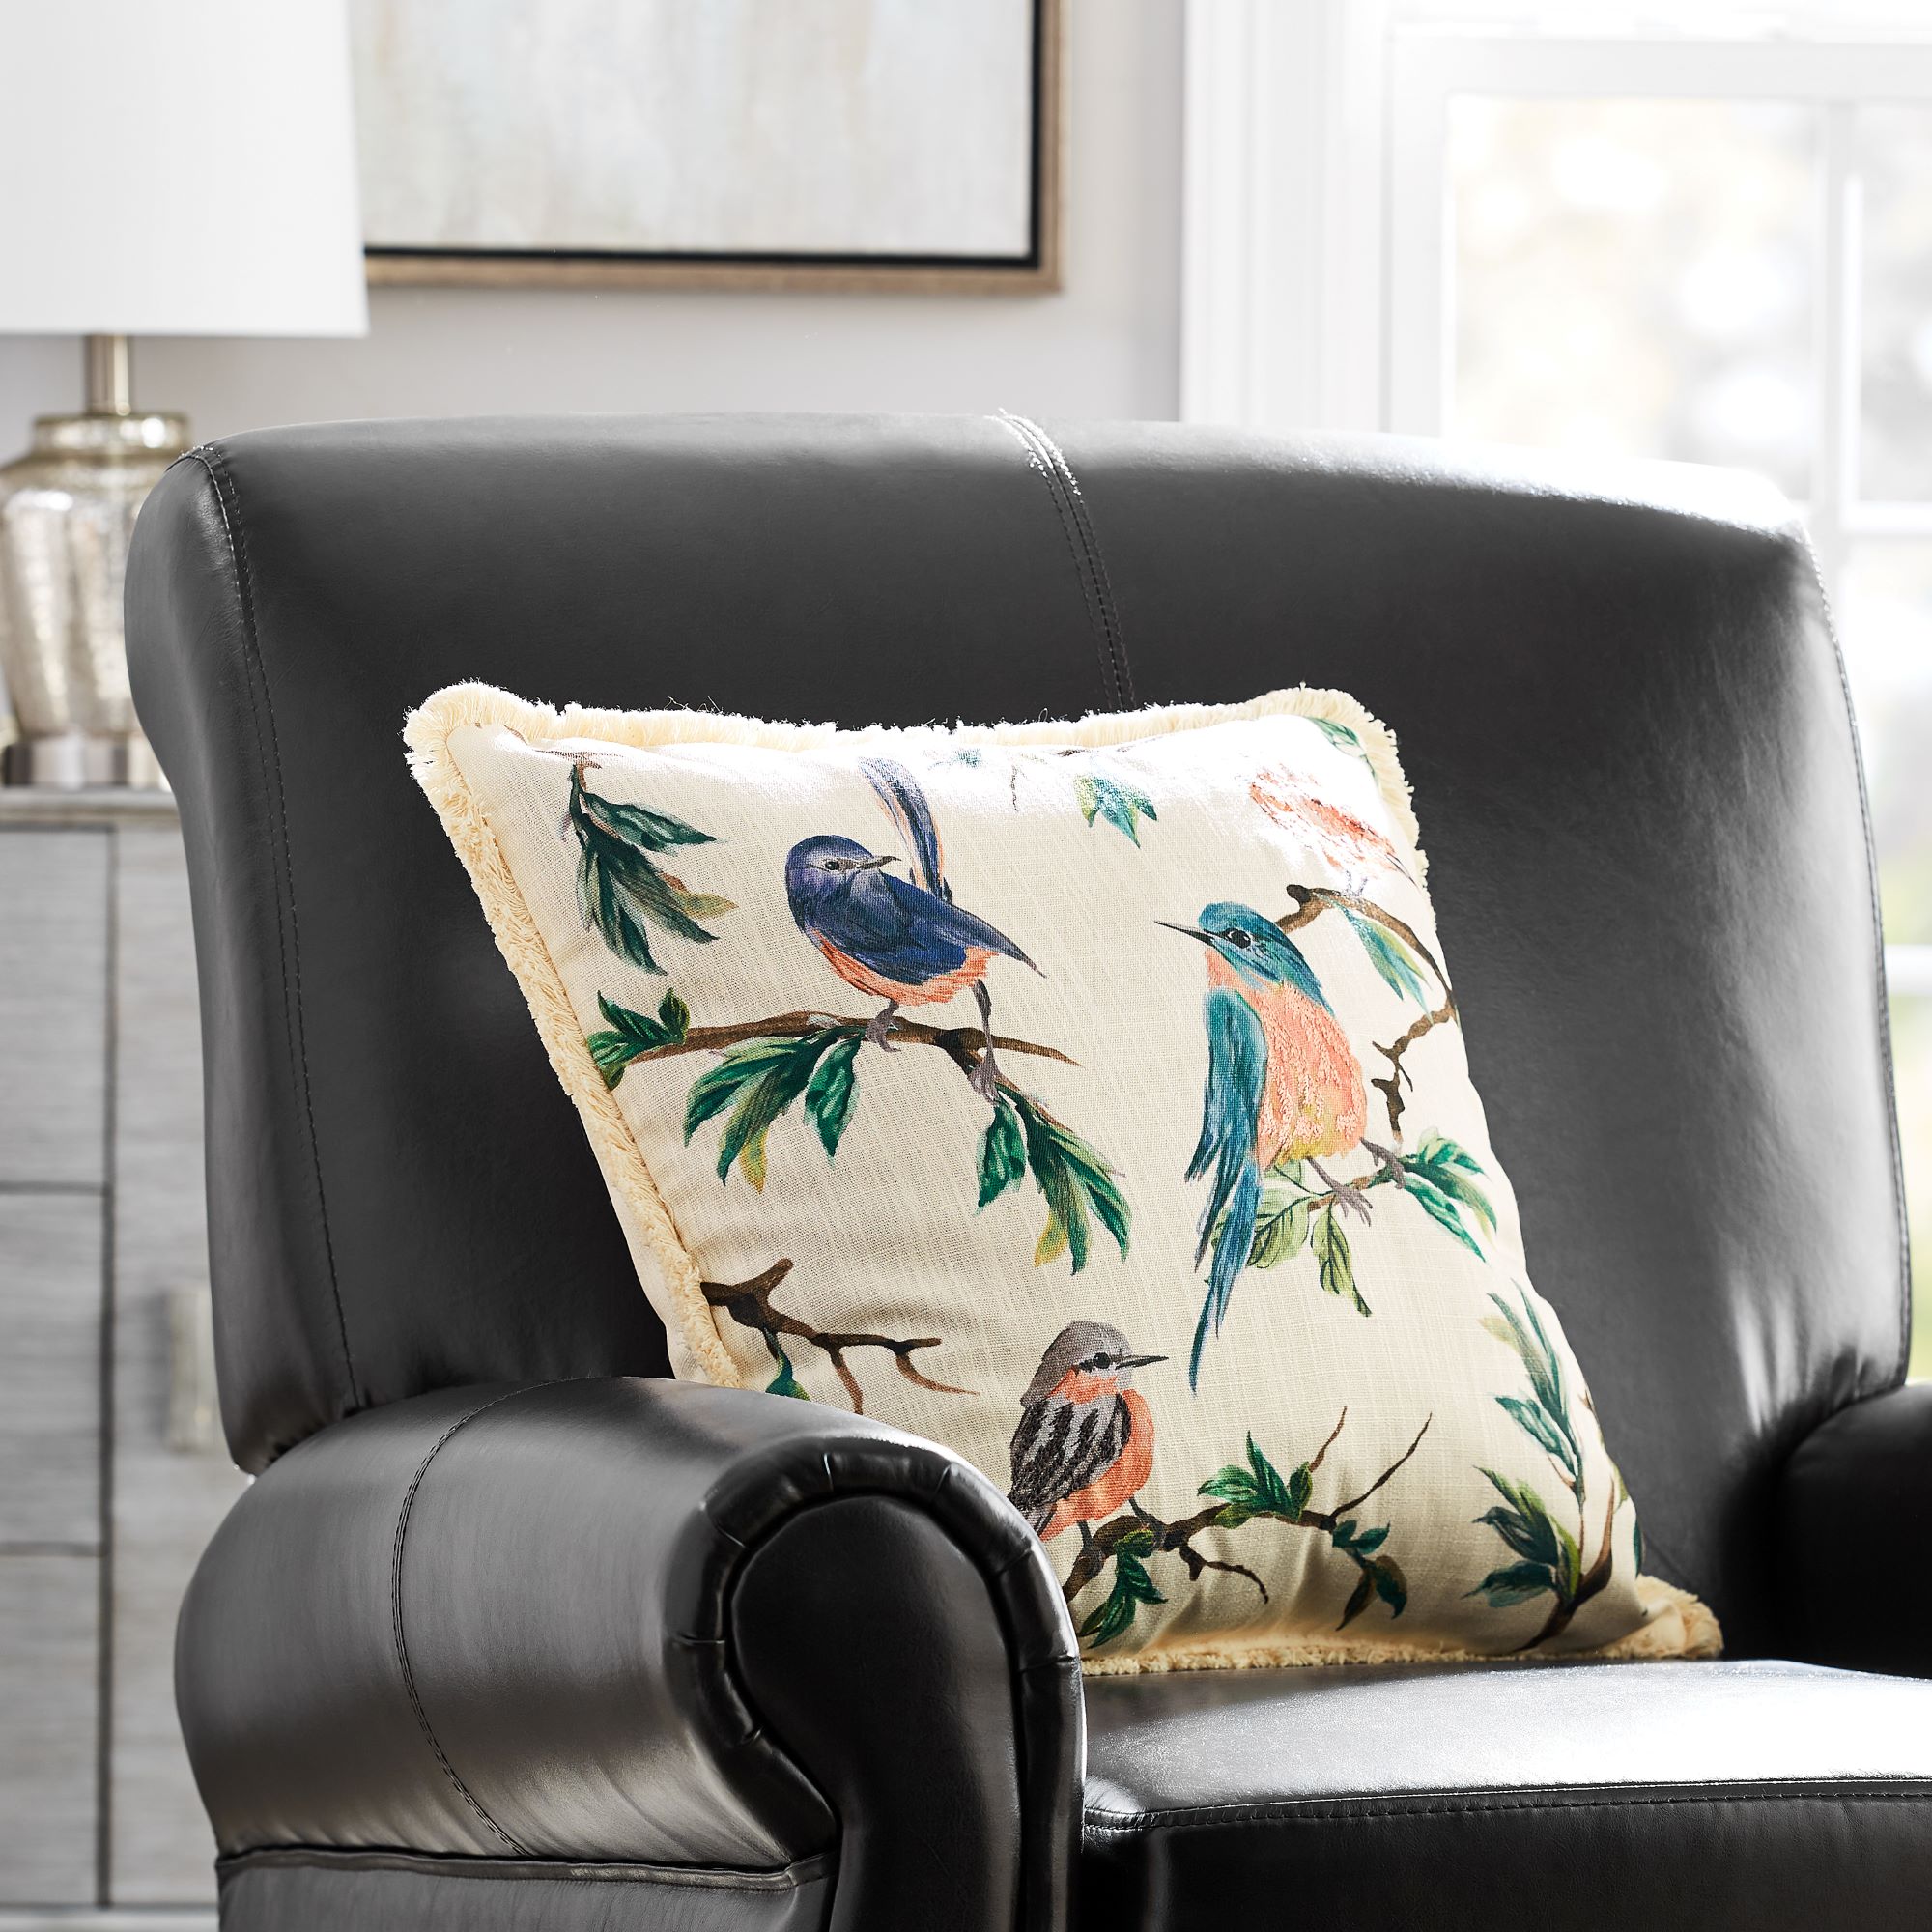 Mainstays Printed Bird Decorative Square Pillow, 18x18, Multi-Color, 1 per Pack - image 2 of 5